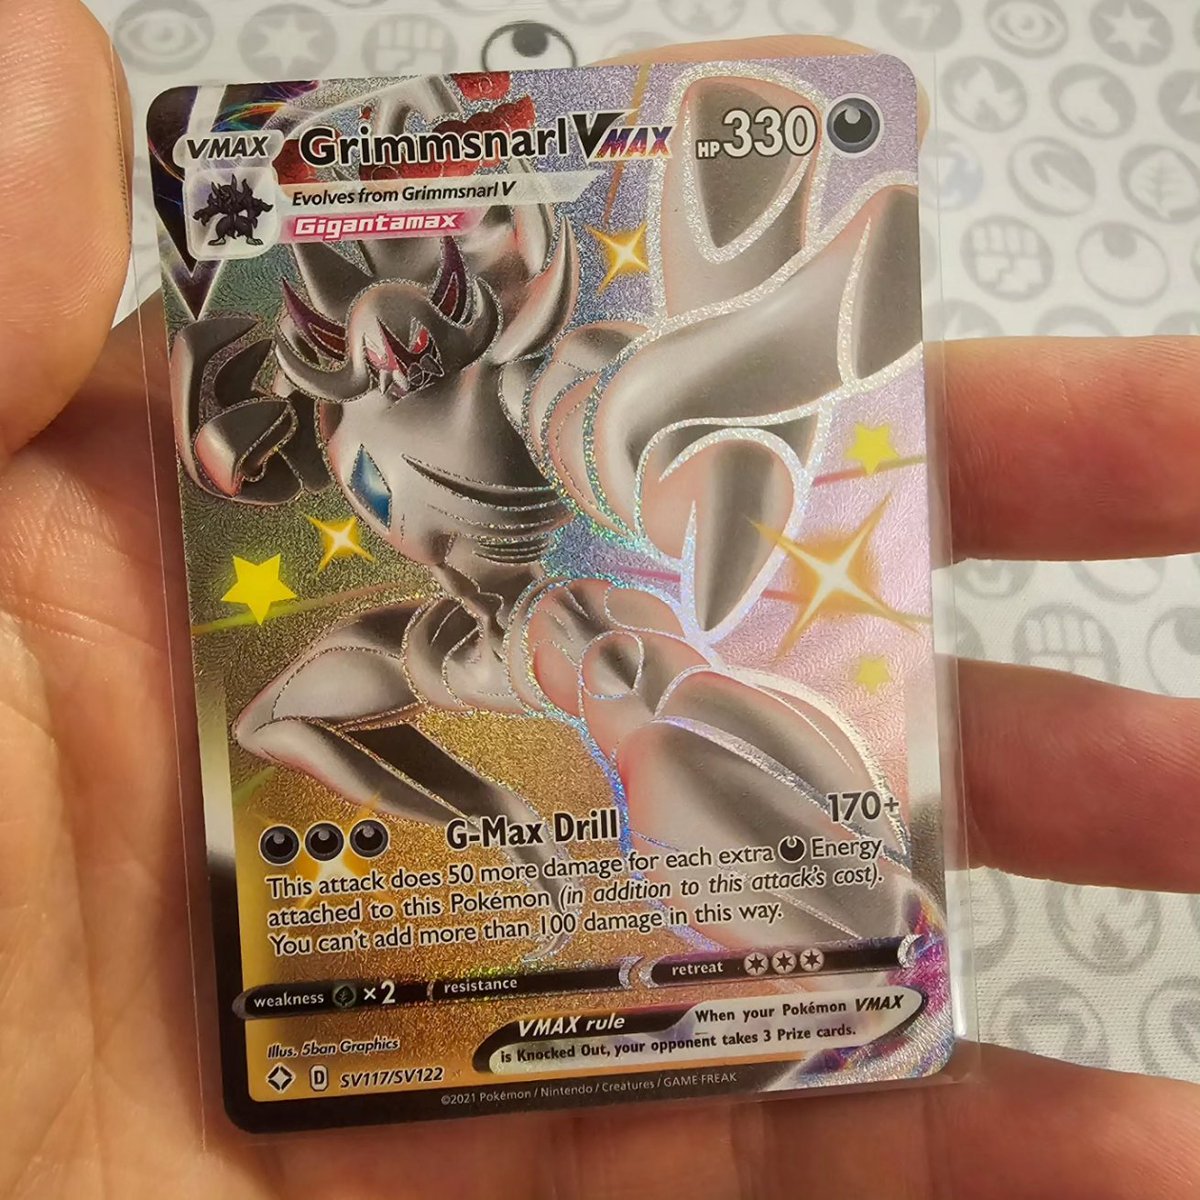 Been a hectic summer..forgot to post pulls from 300+ followers stream celebration! Forgive me... 2 months old. From 6.15.23
Join us as team ranger twitch.tv/orngranger
#OrngRanger #TeamRanger #StayShiny #Pokémon #Pokemon #PokemonCommunity #Grimmsnarl #PokemonTCG #TCG